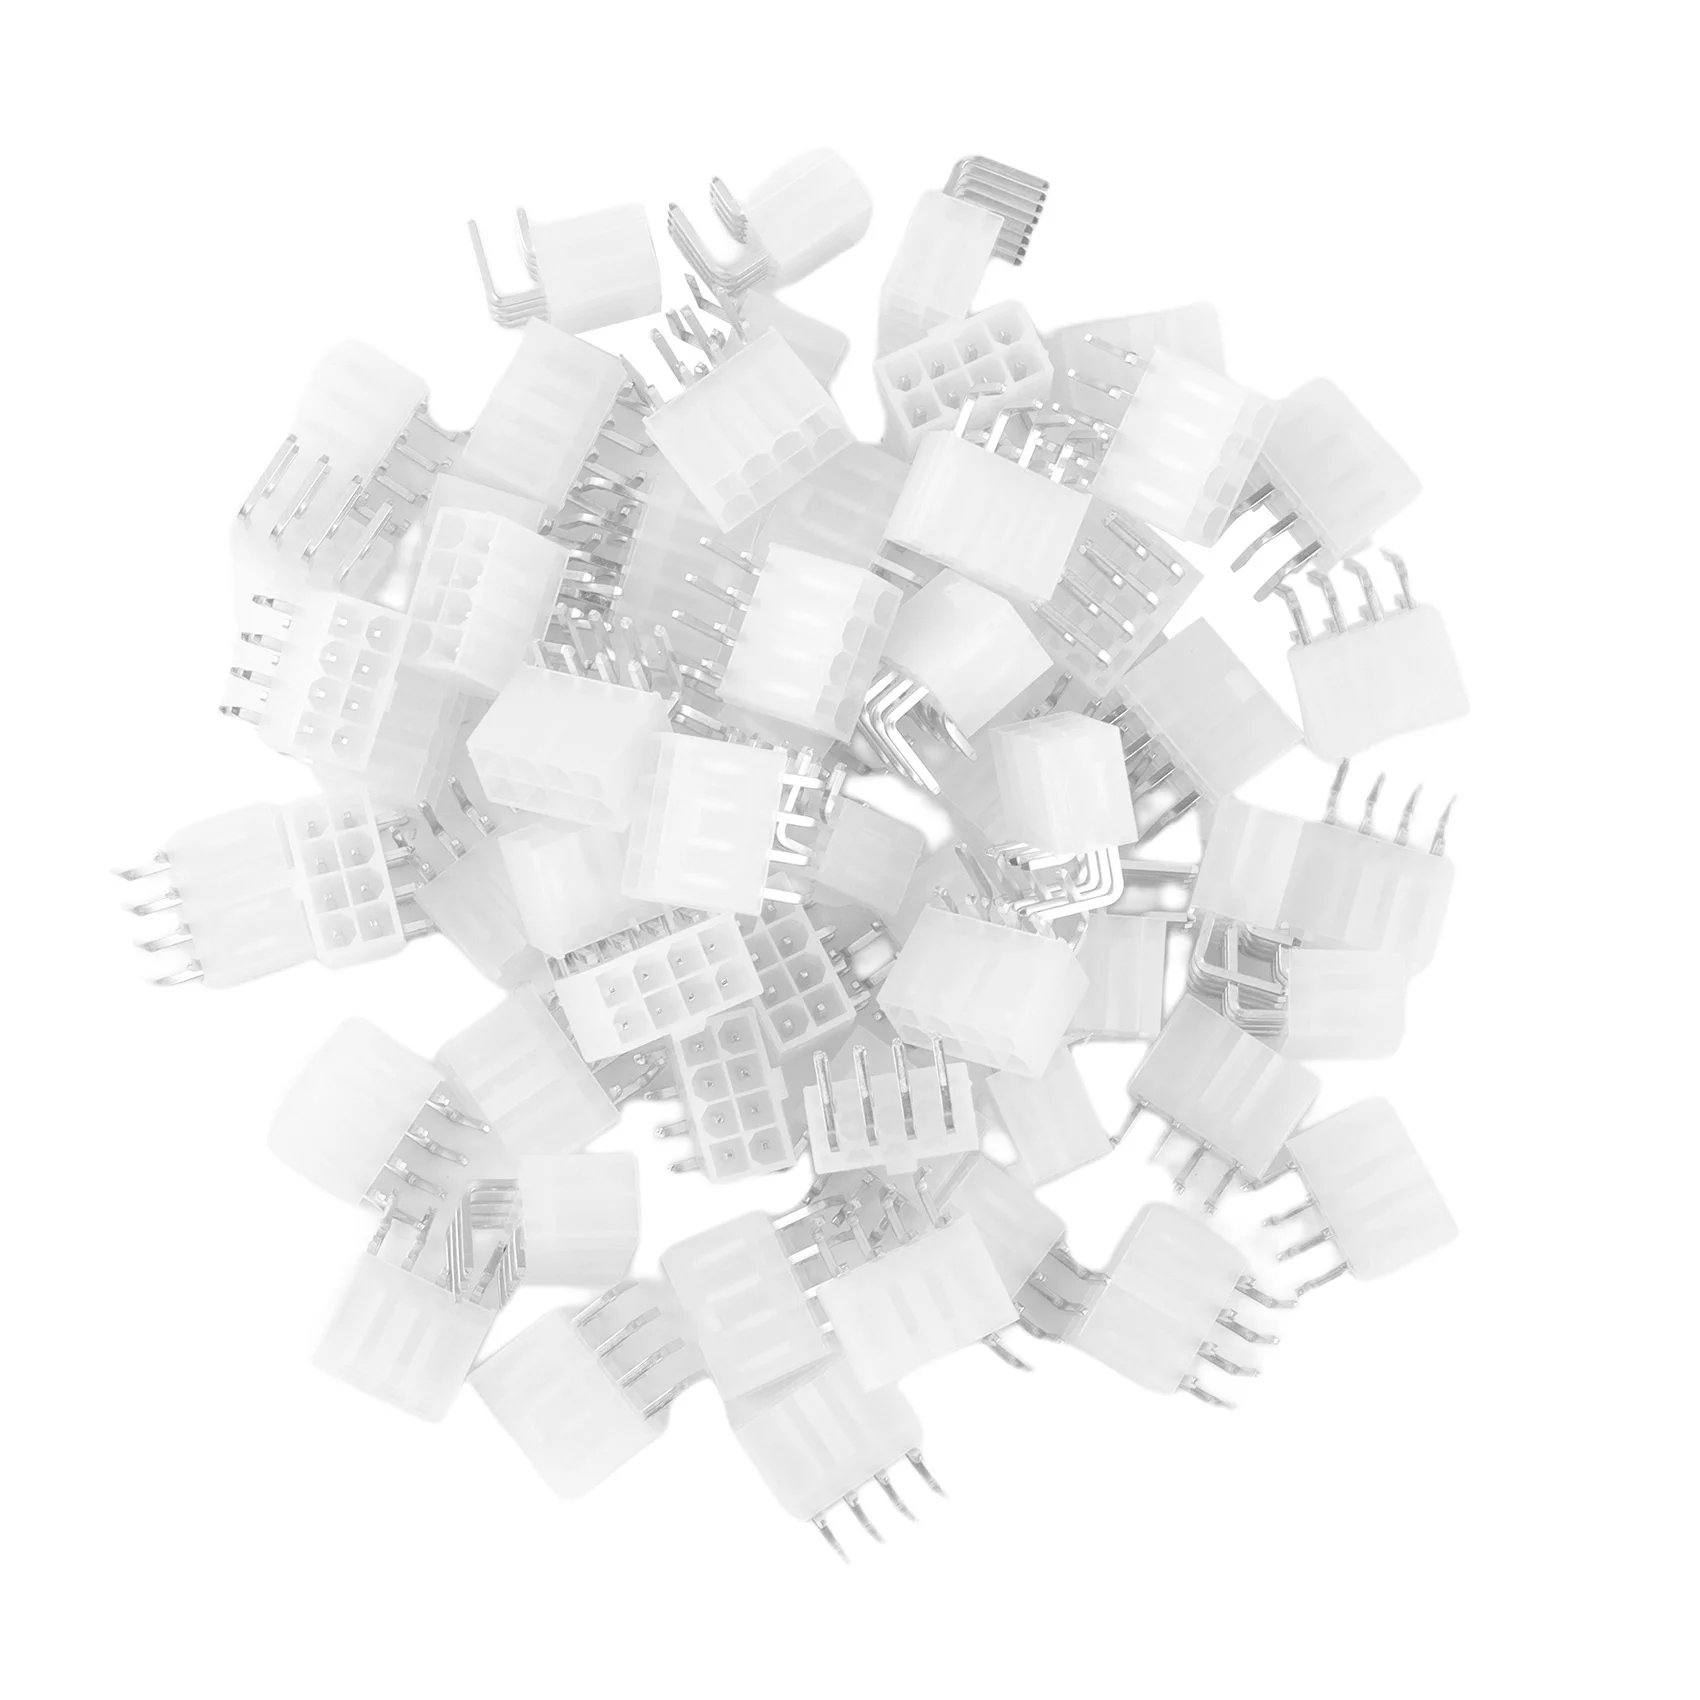 

60PCS/1LOT 5557 4.2mm 8P 8PIN Female Socket Curved Needle for PC Computer ATX CPU Power Connector